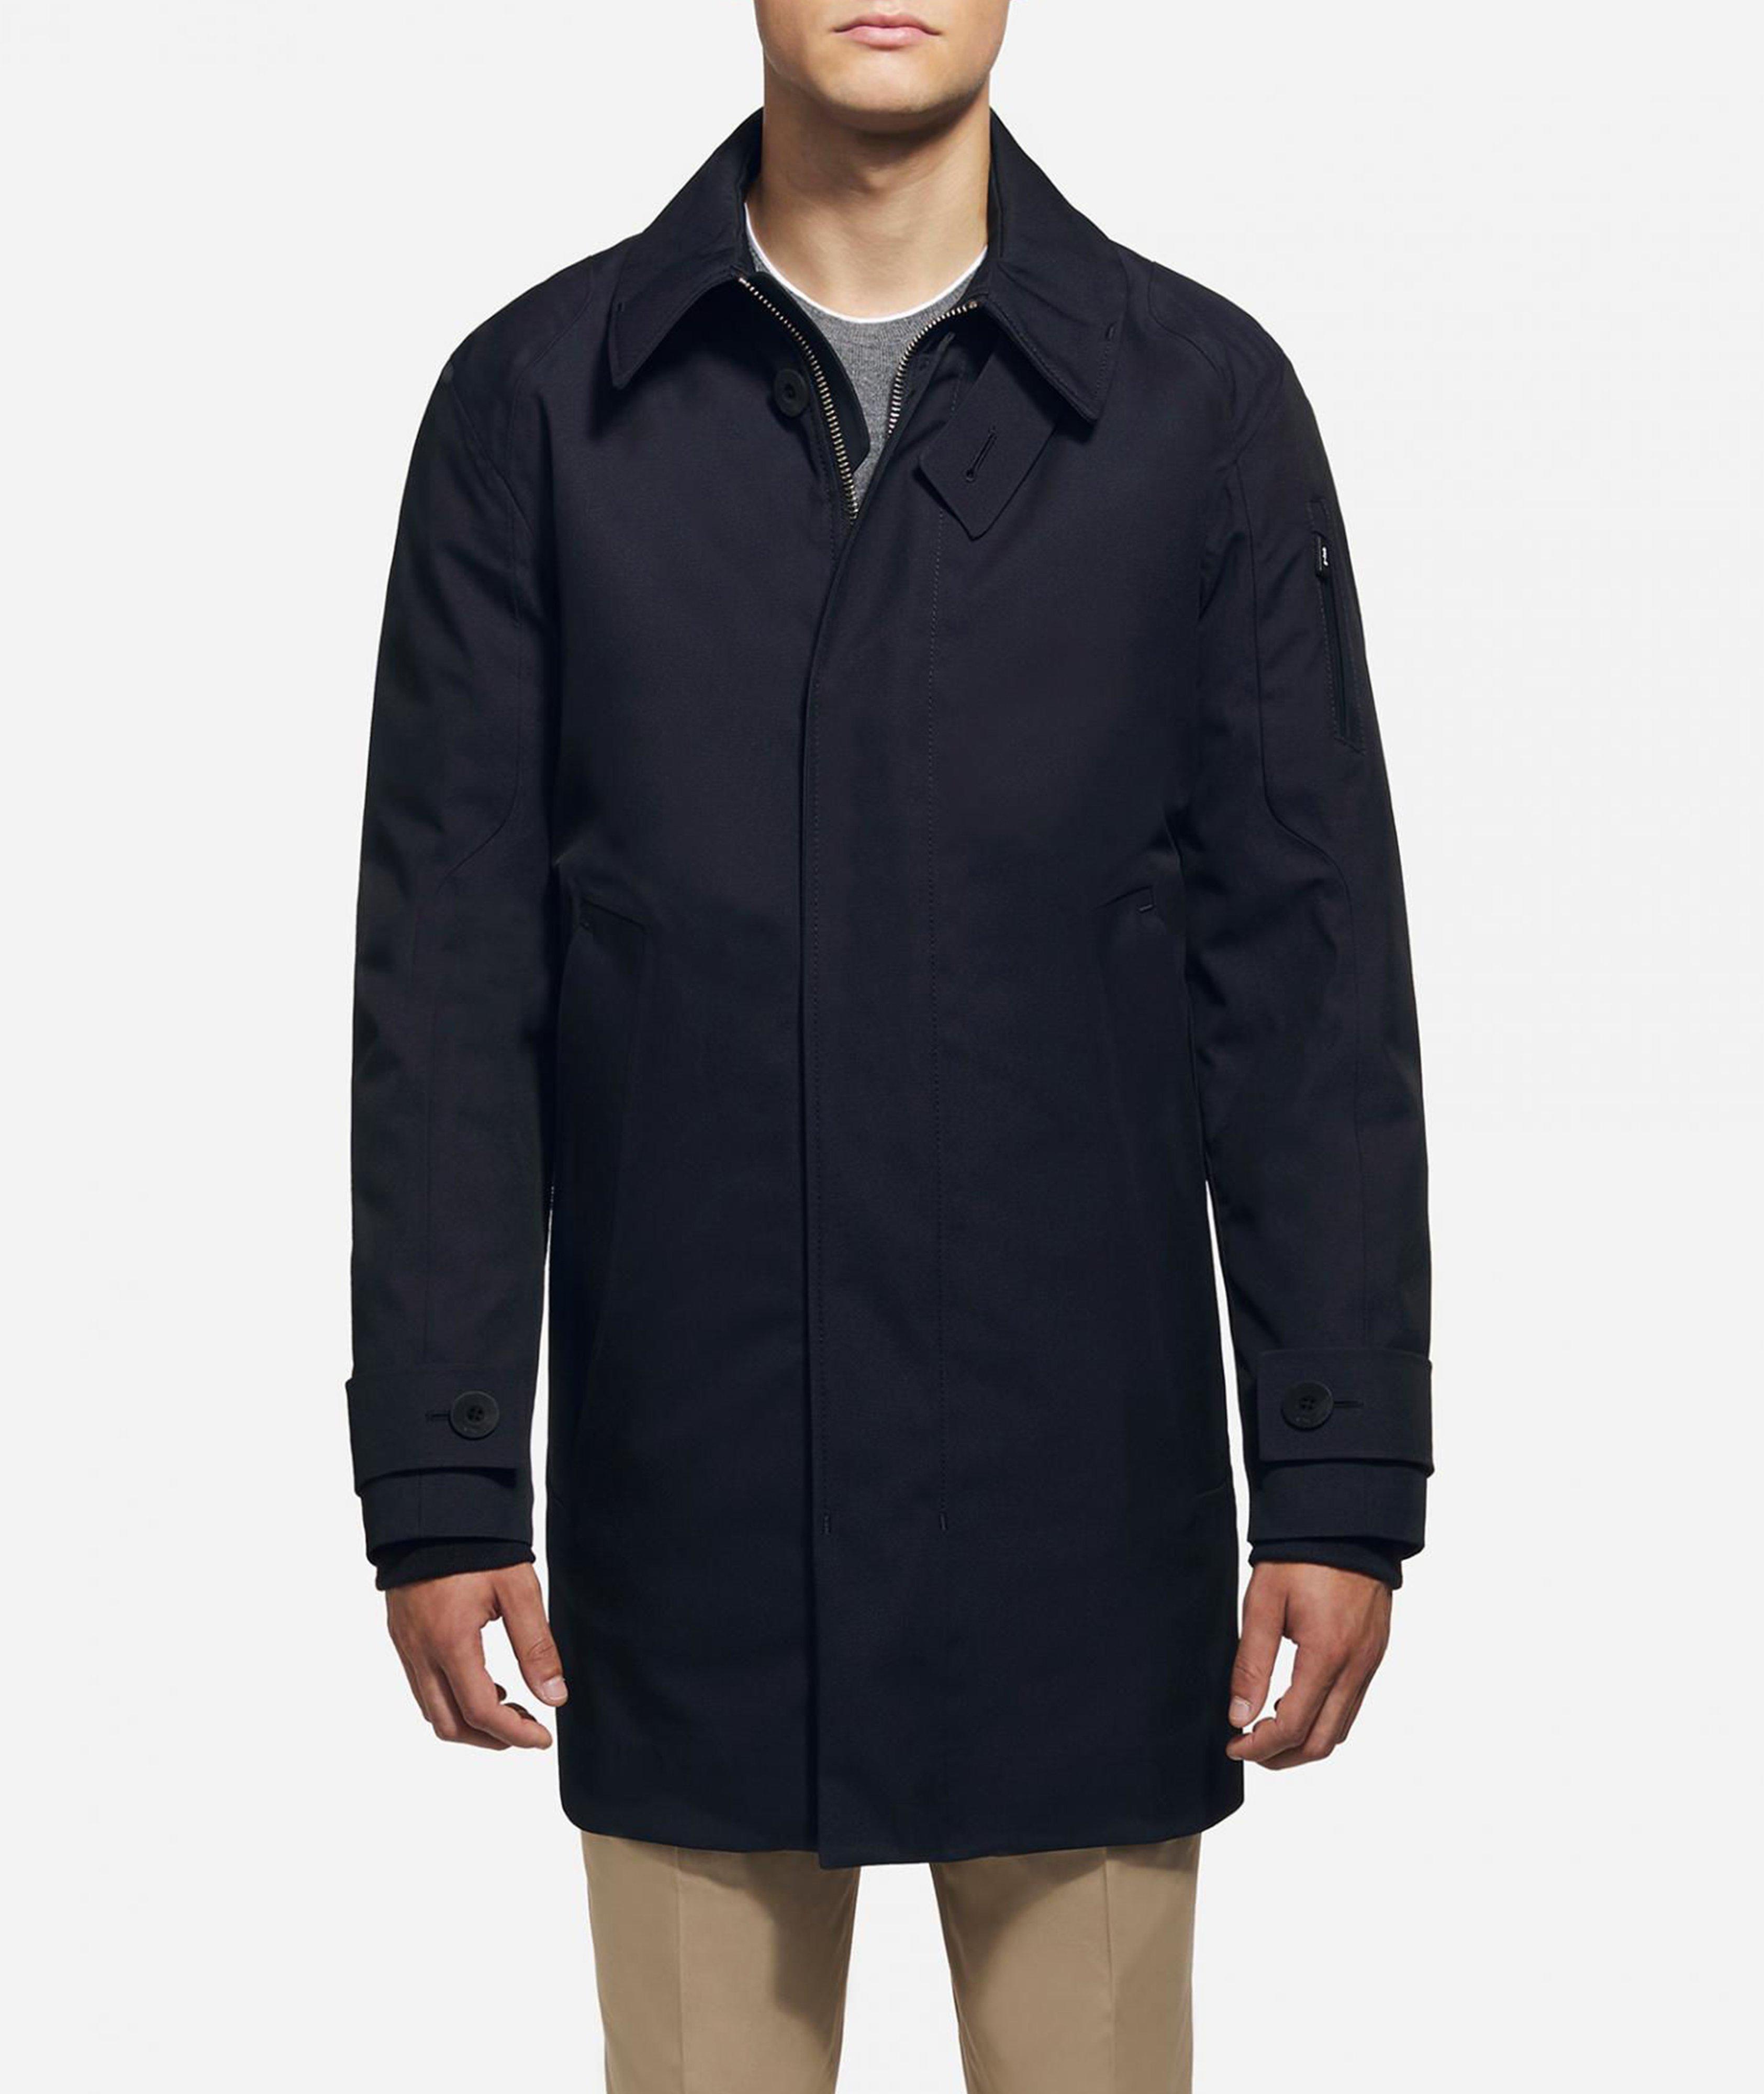 ZOOM Tech Touch Business Parka image 1